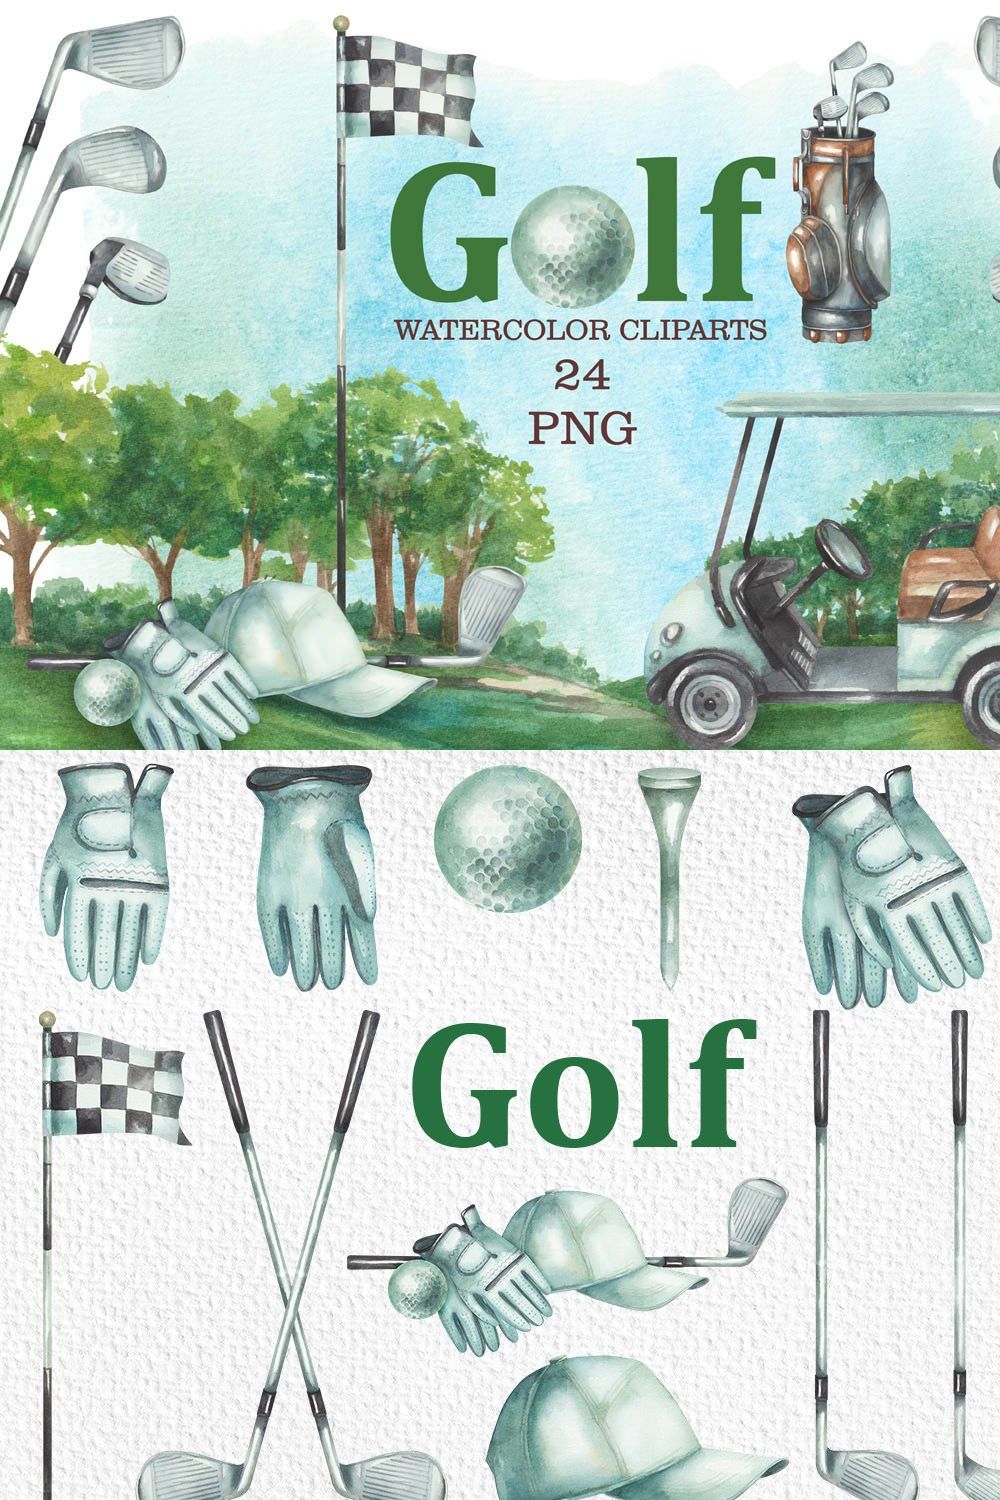 Golf watercolor clipart pinterest preview image.